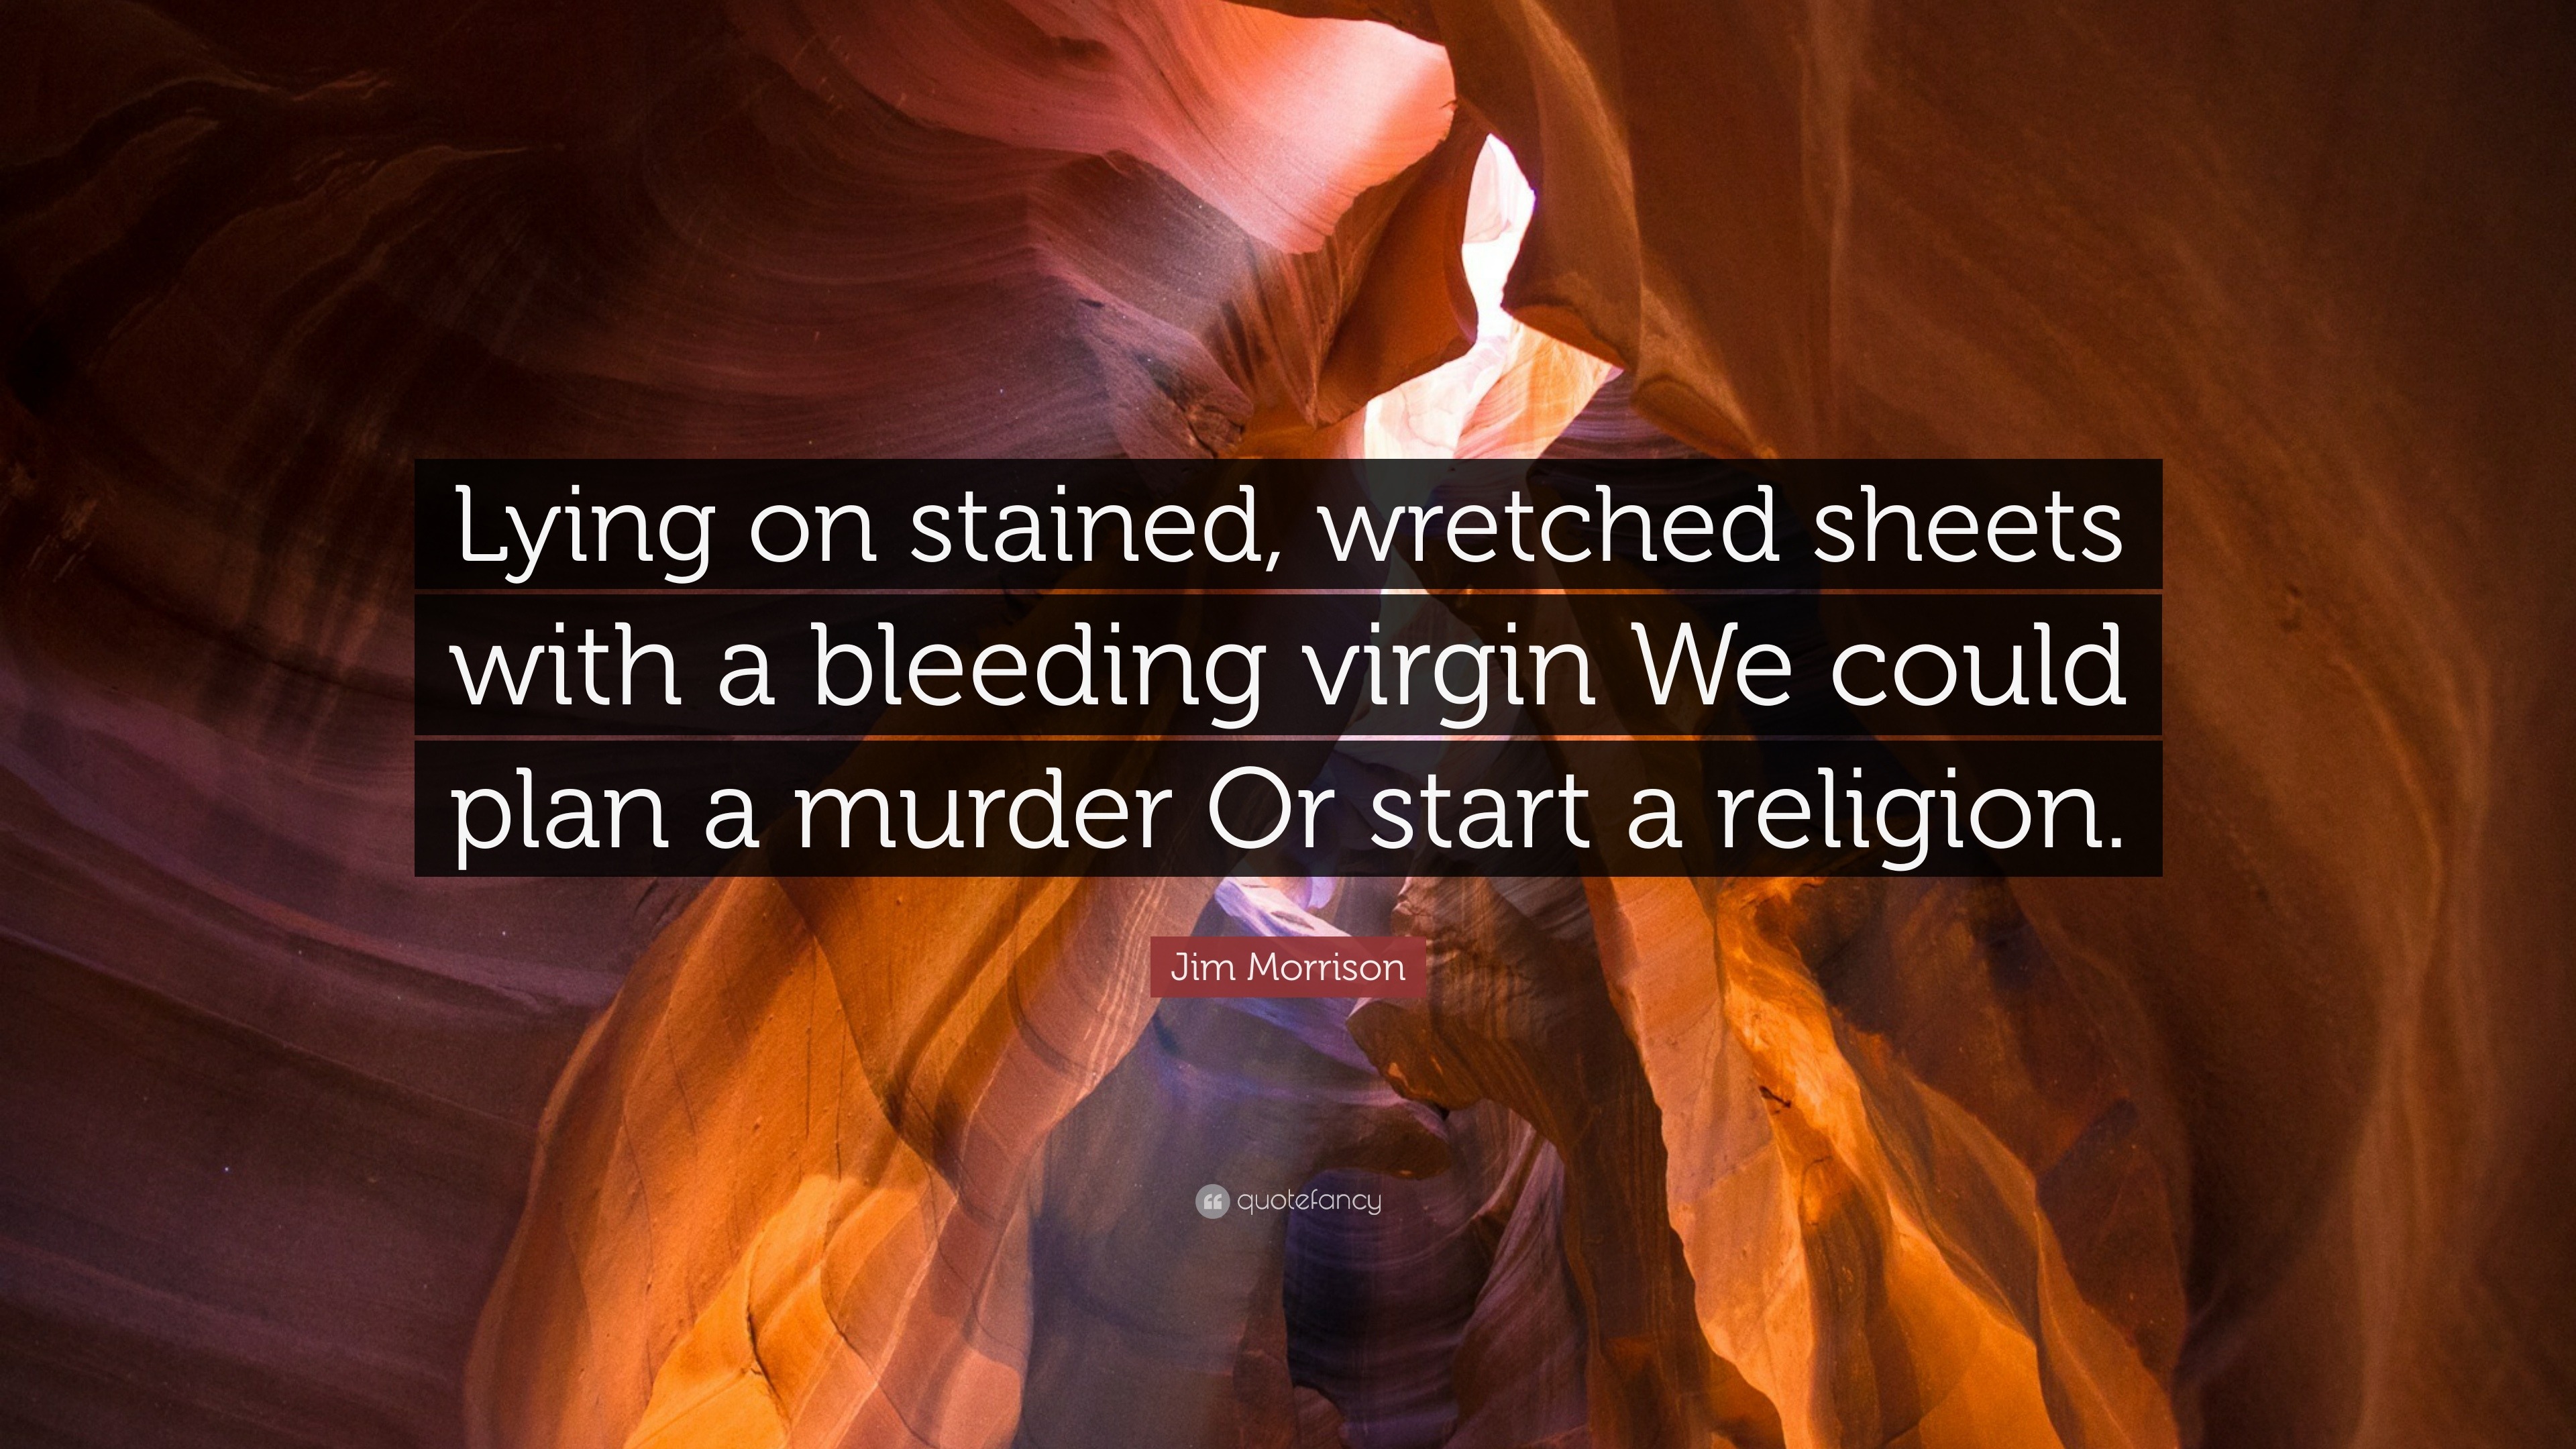 Jim Morrison Quote: “Lying on stained, wretched sheets with a bleeding  virgin We could plan a